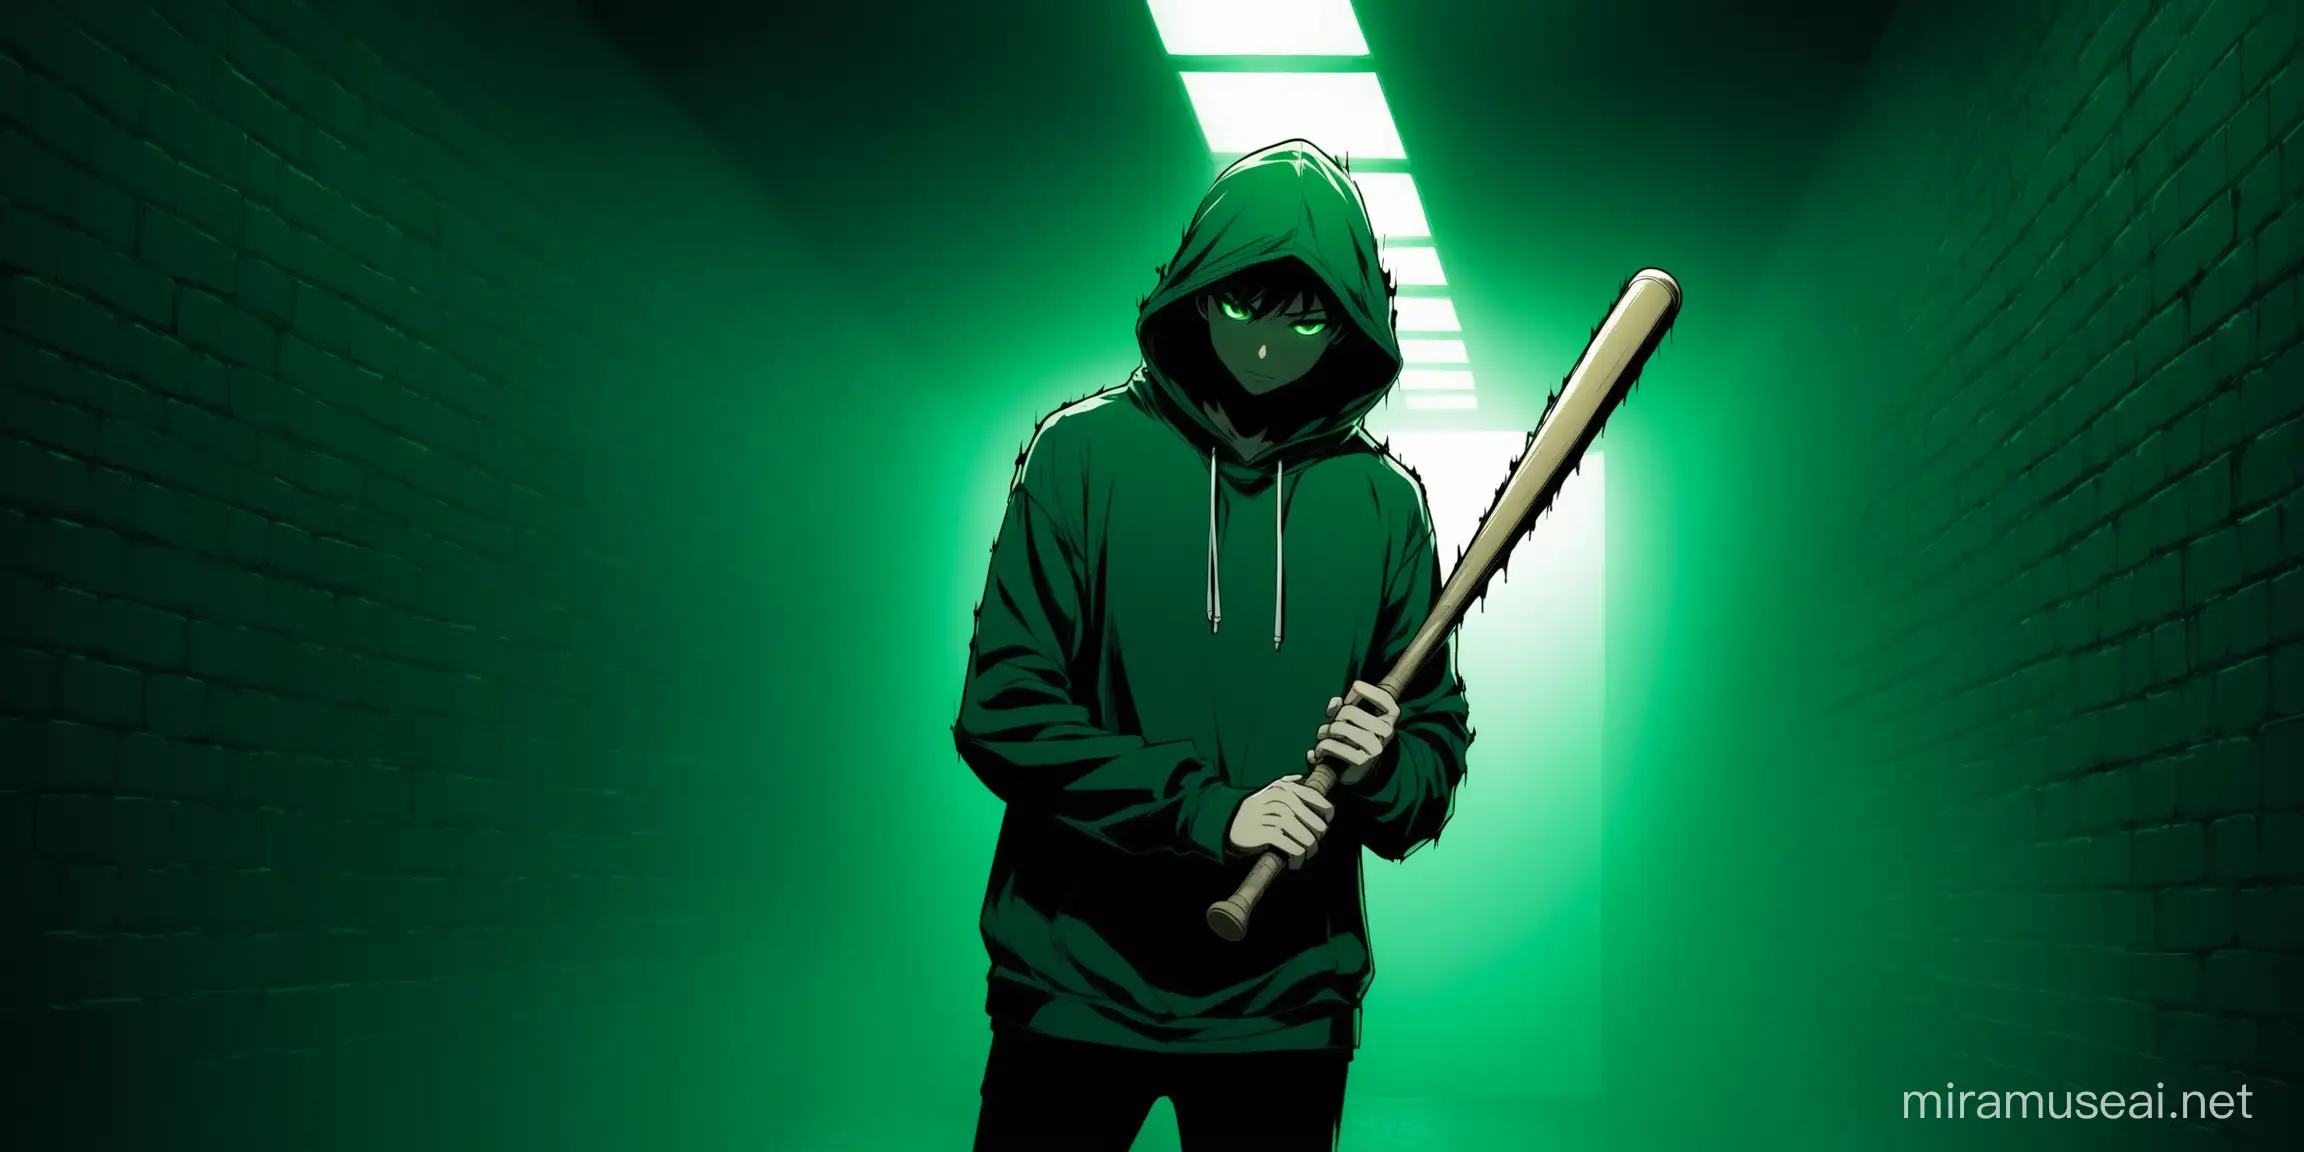 An image of a hand holding baseball bat in his hands wearing full sleeve hoodie anime style in an underground secret room with dark green contrasts and vibe 